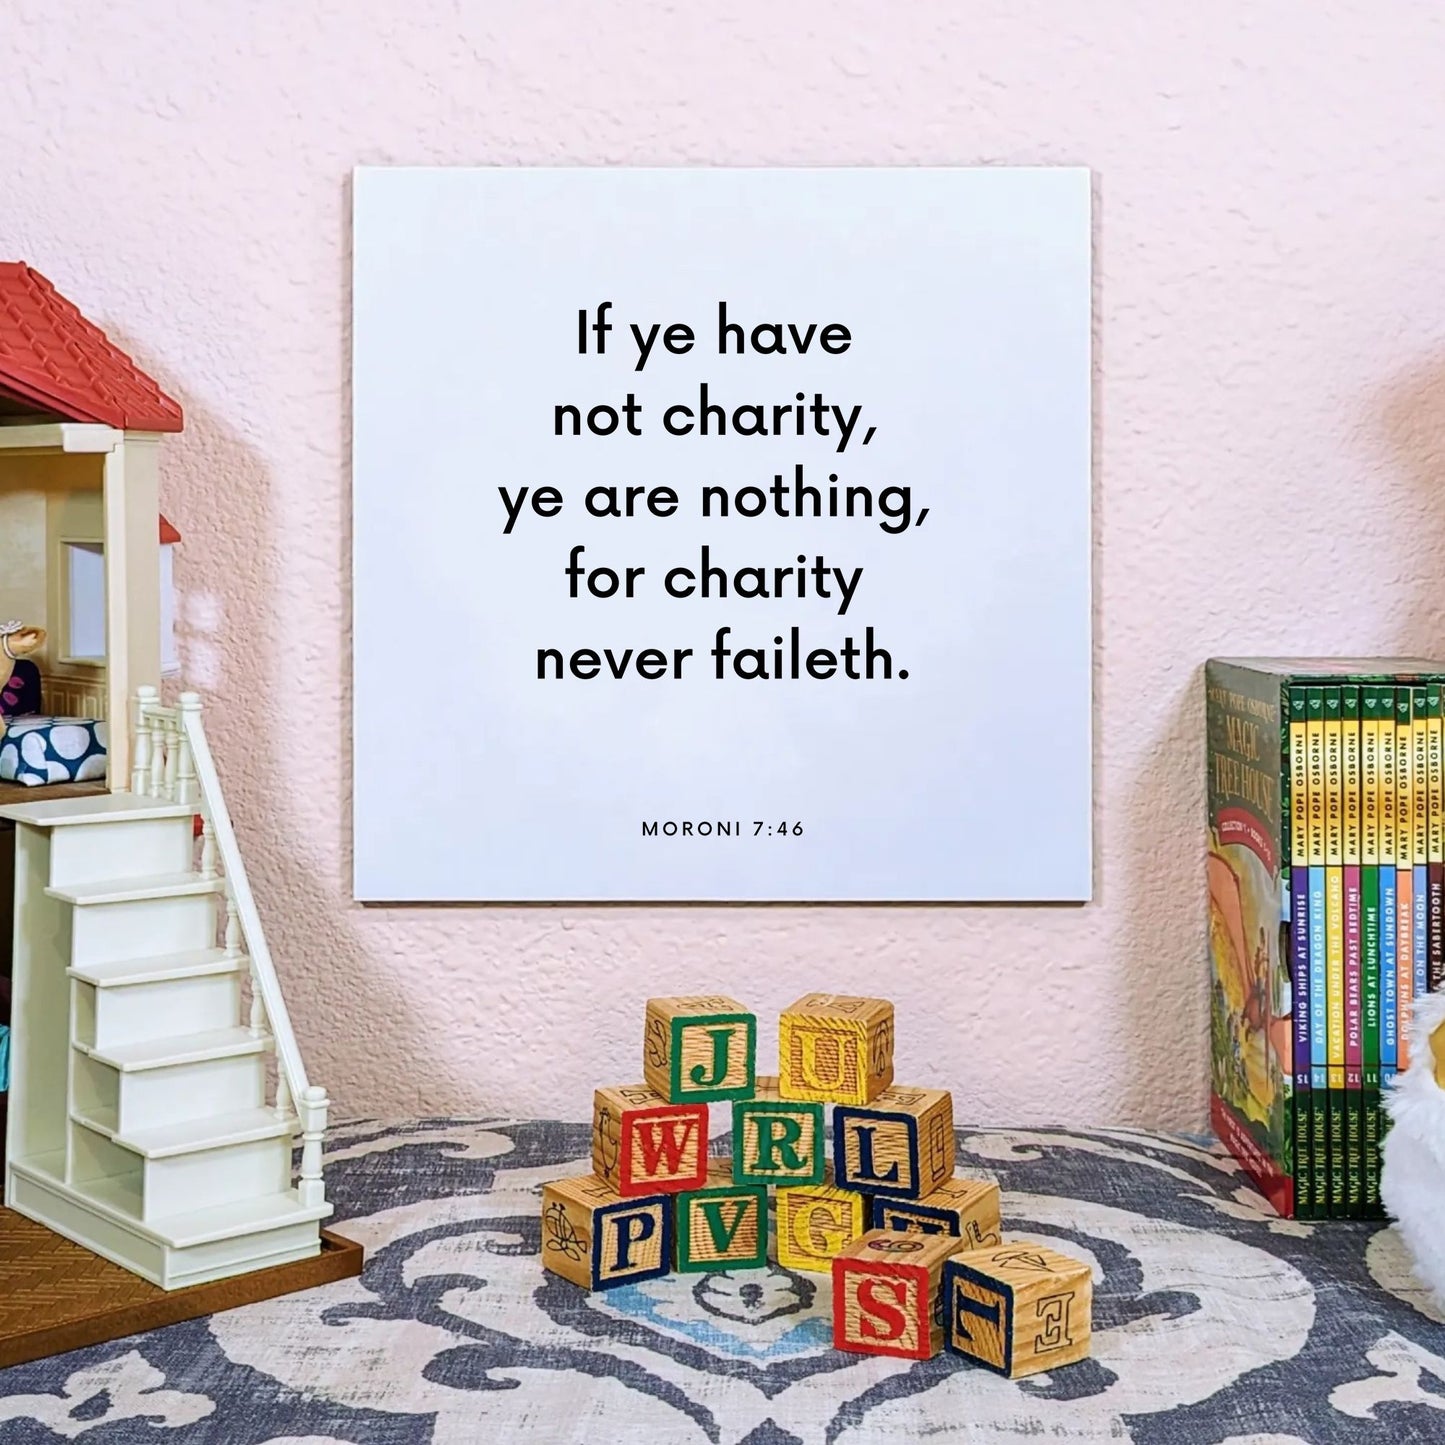 Playroom mouting of the scripture tile for Moroni 7:46 - "If ye have not charity, ye are nothing"